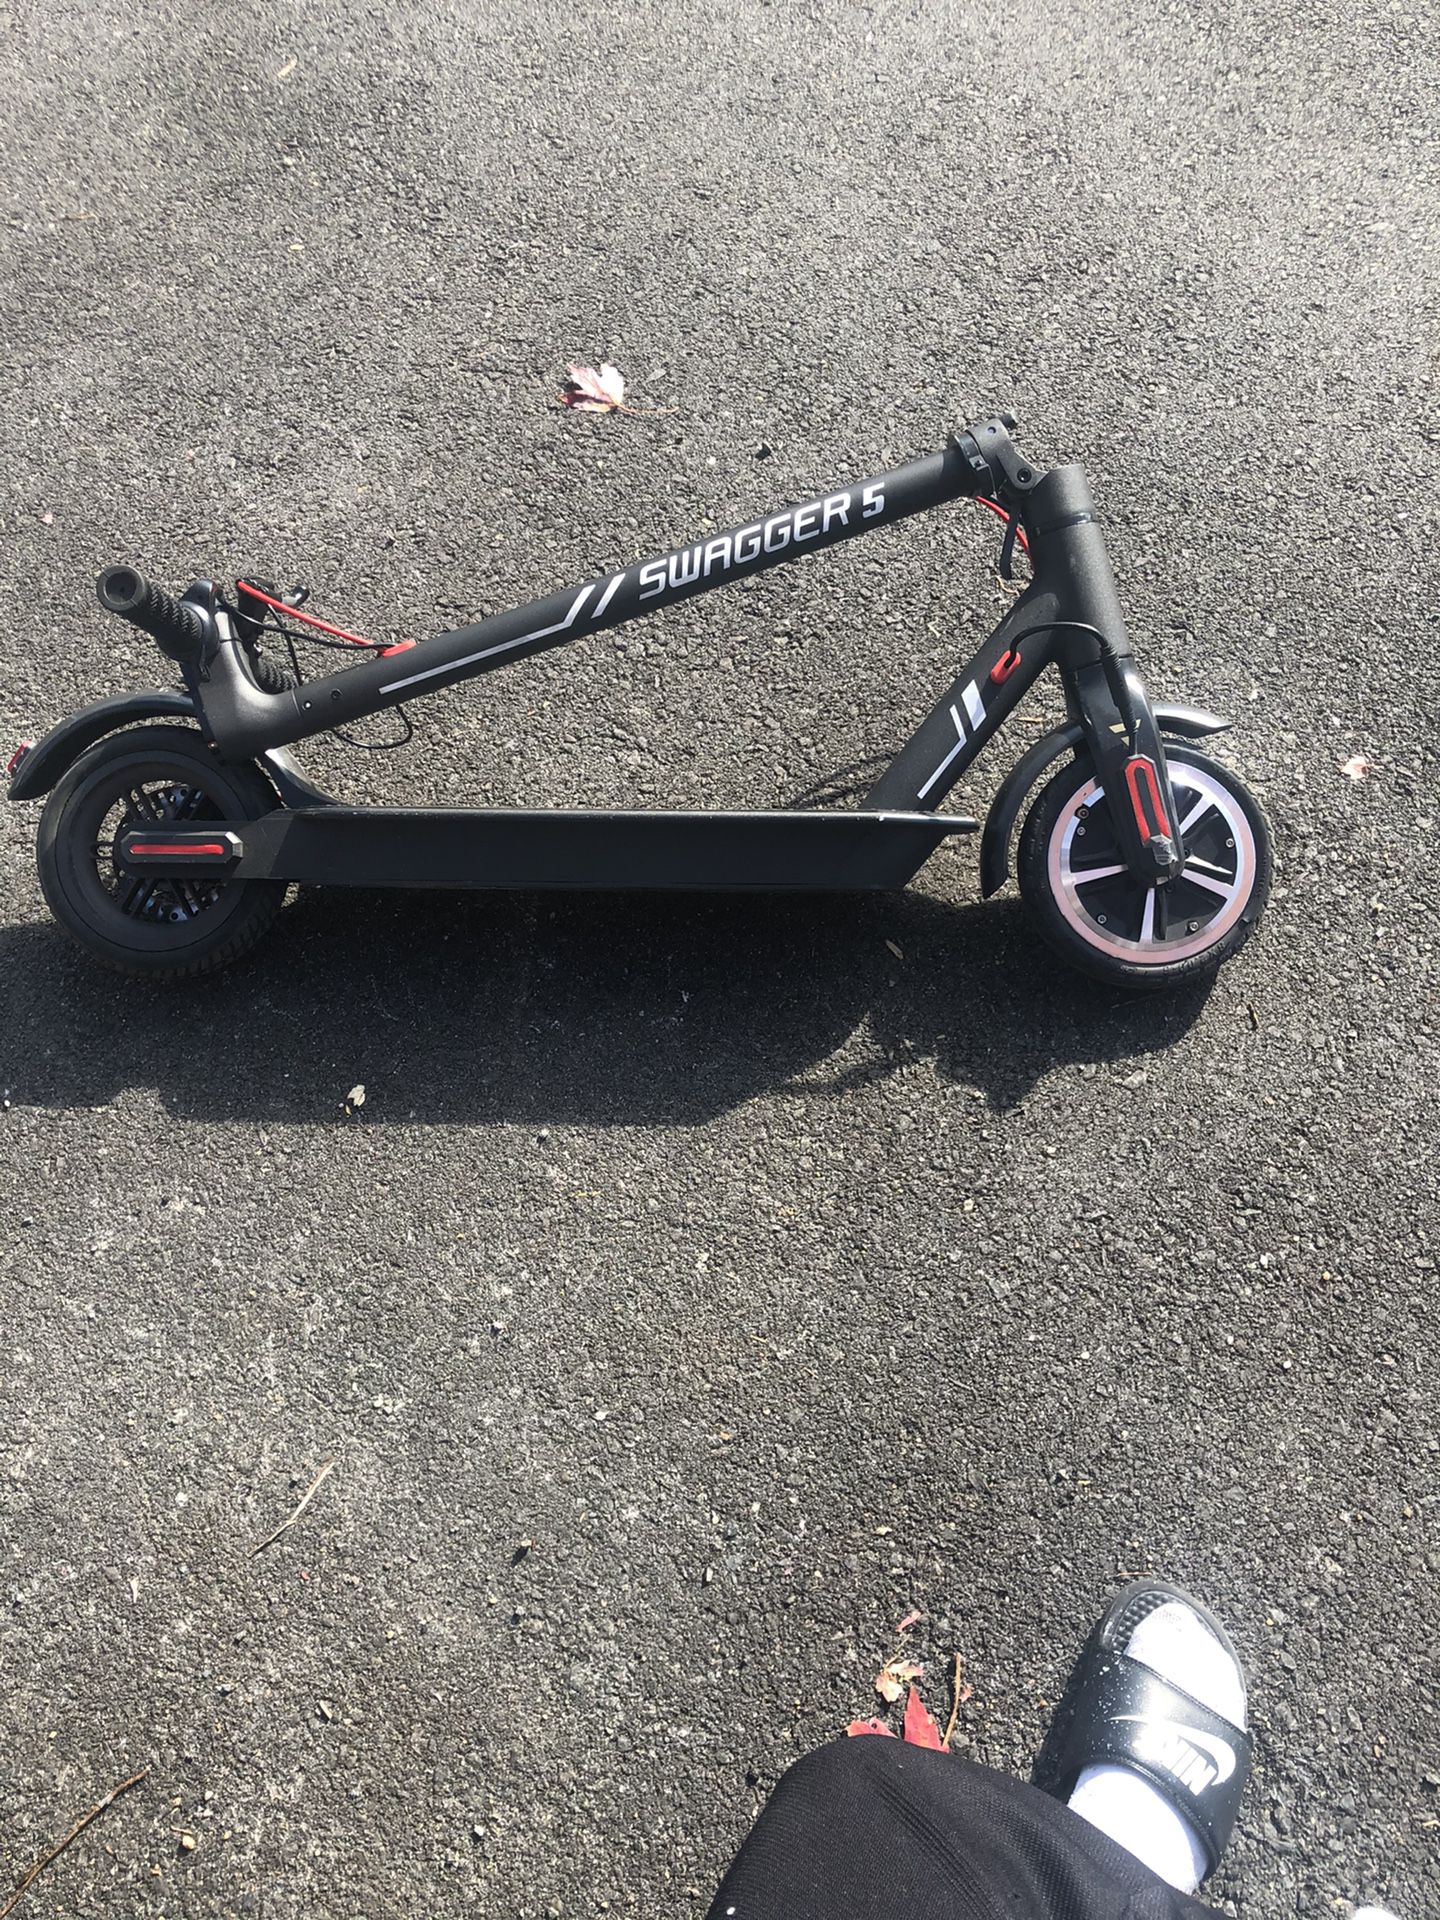 Swagger 5 electric scooter